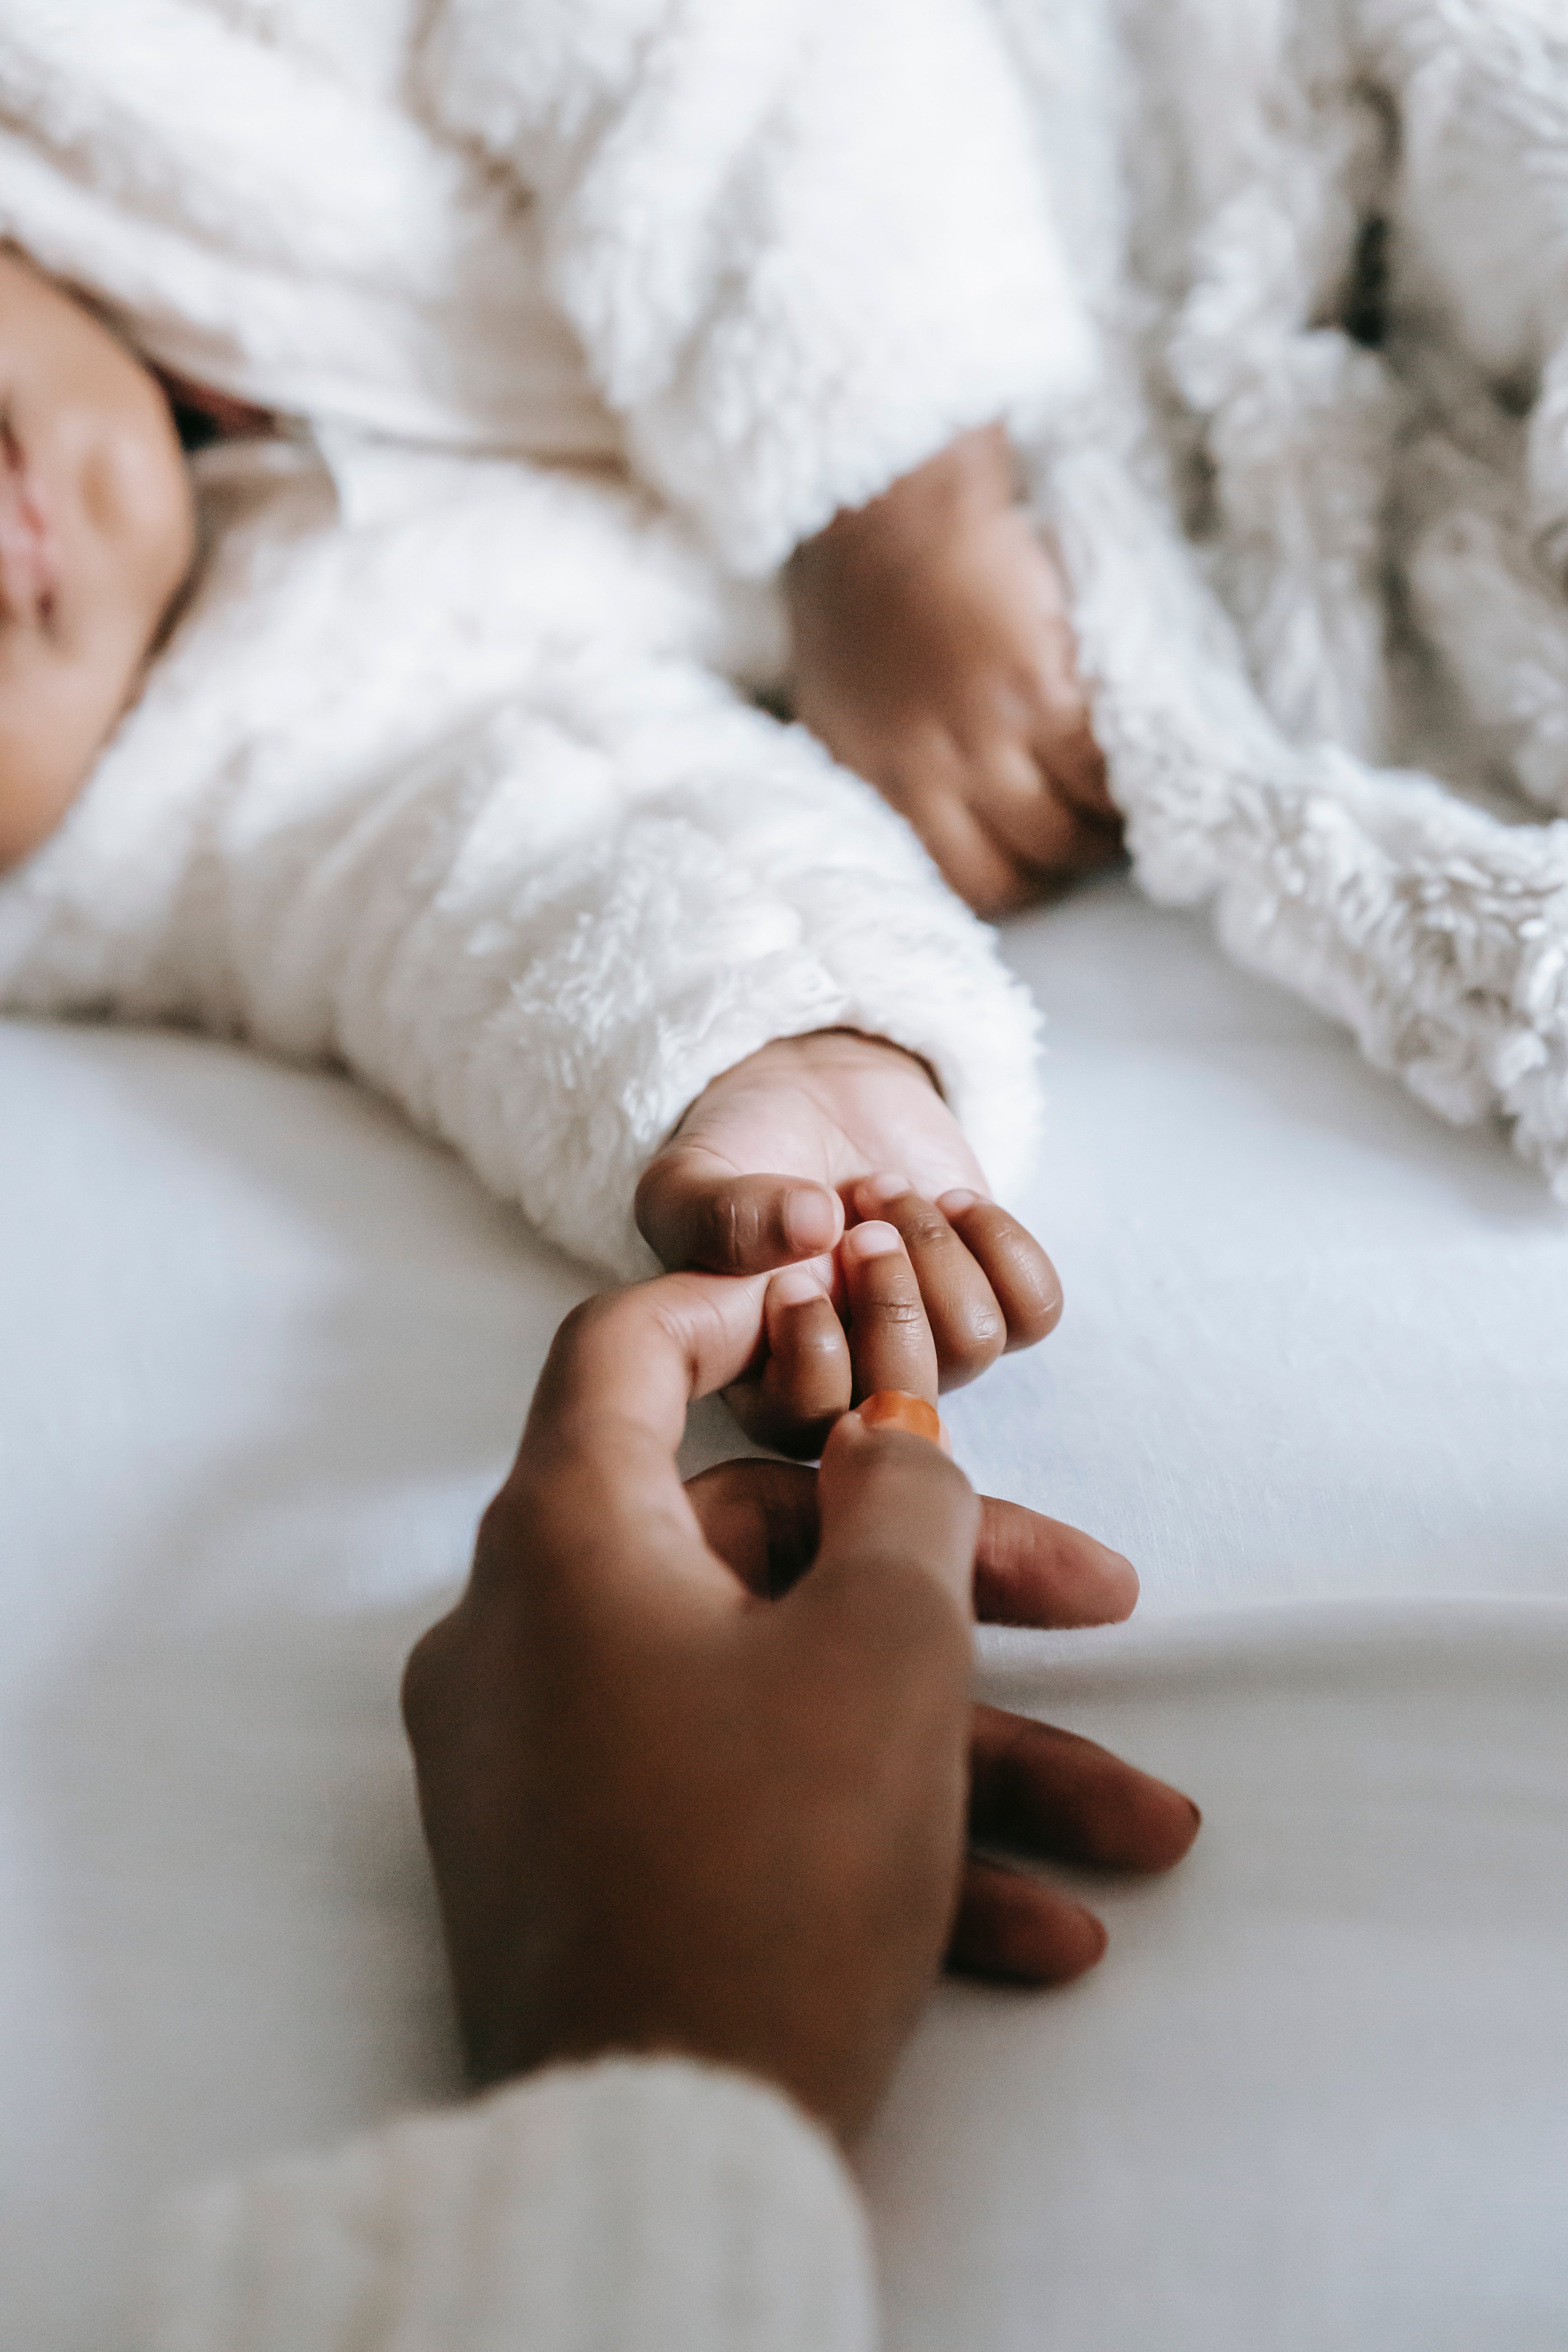 Kathy found a picture of a black woman and a baby | Photo: Pexels